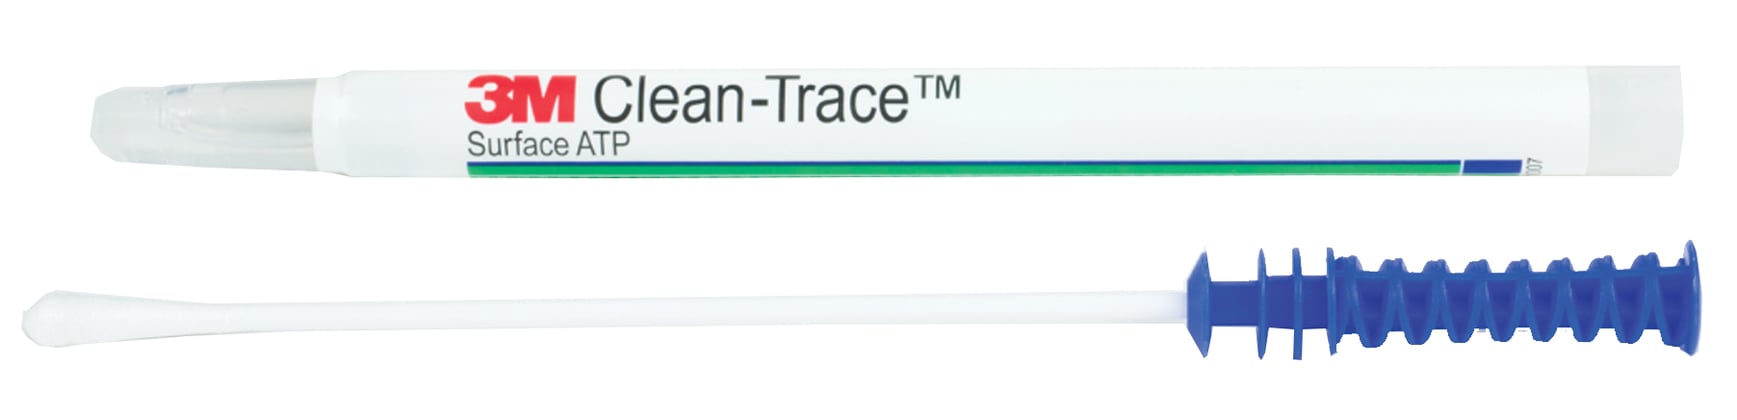 3M Clean-Trace surface ATP test 